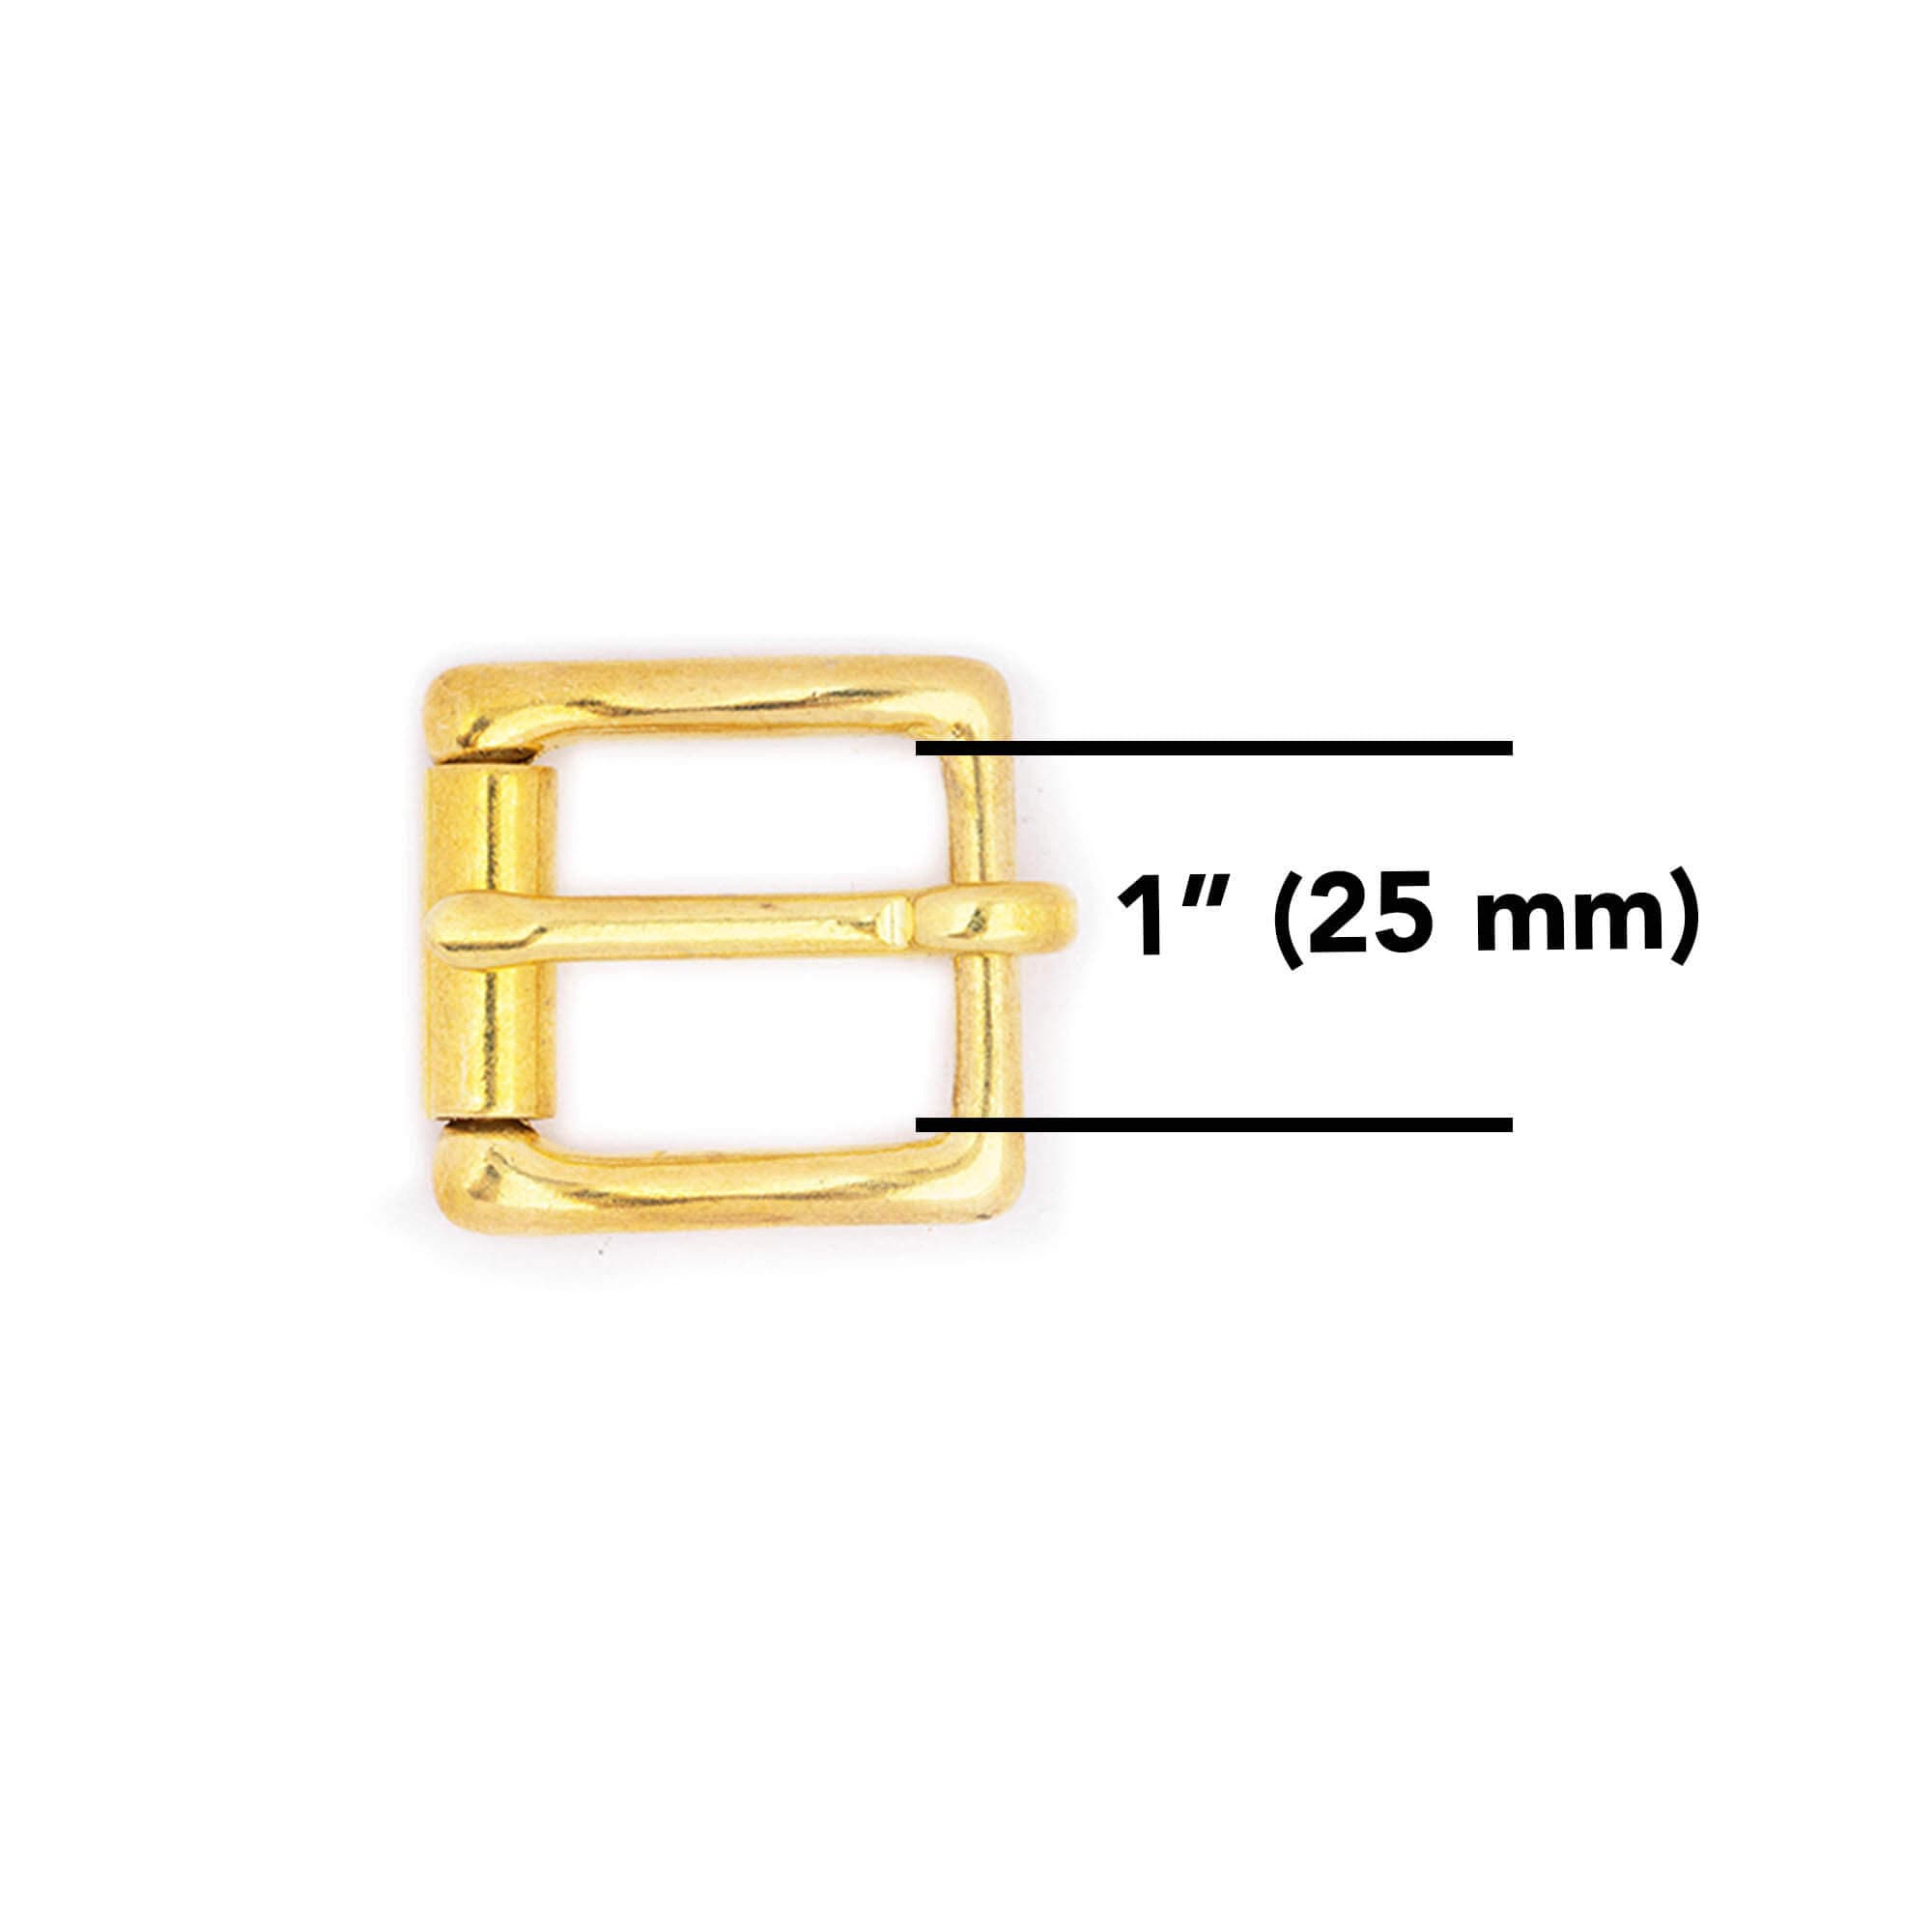 Gold Dog Collar Buckle 25 Mm Solid Brass Roller Buckle 1.0 Heavy